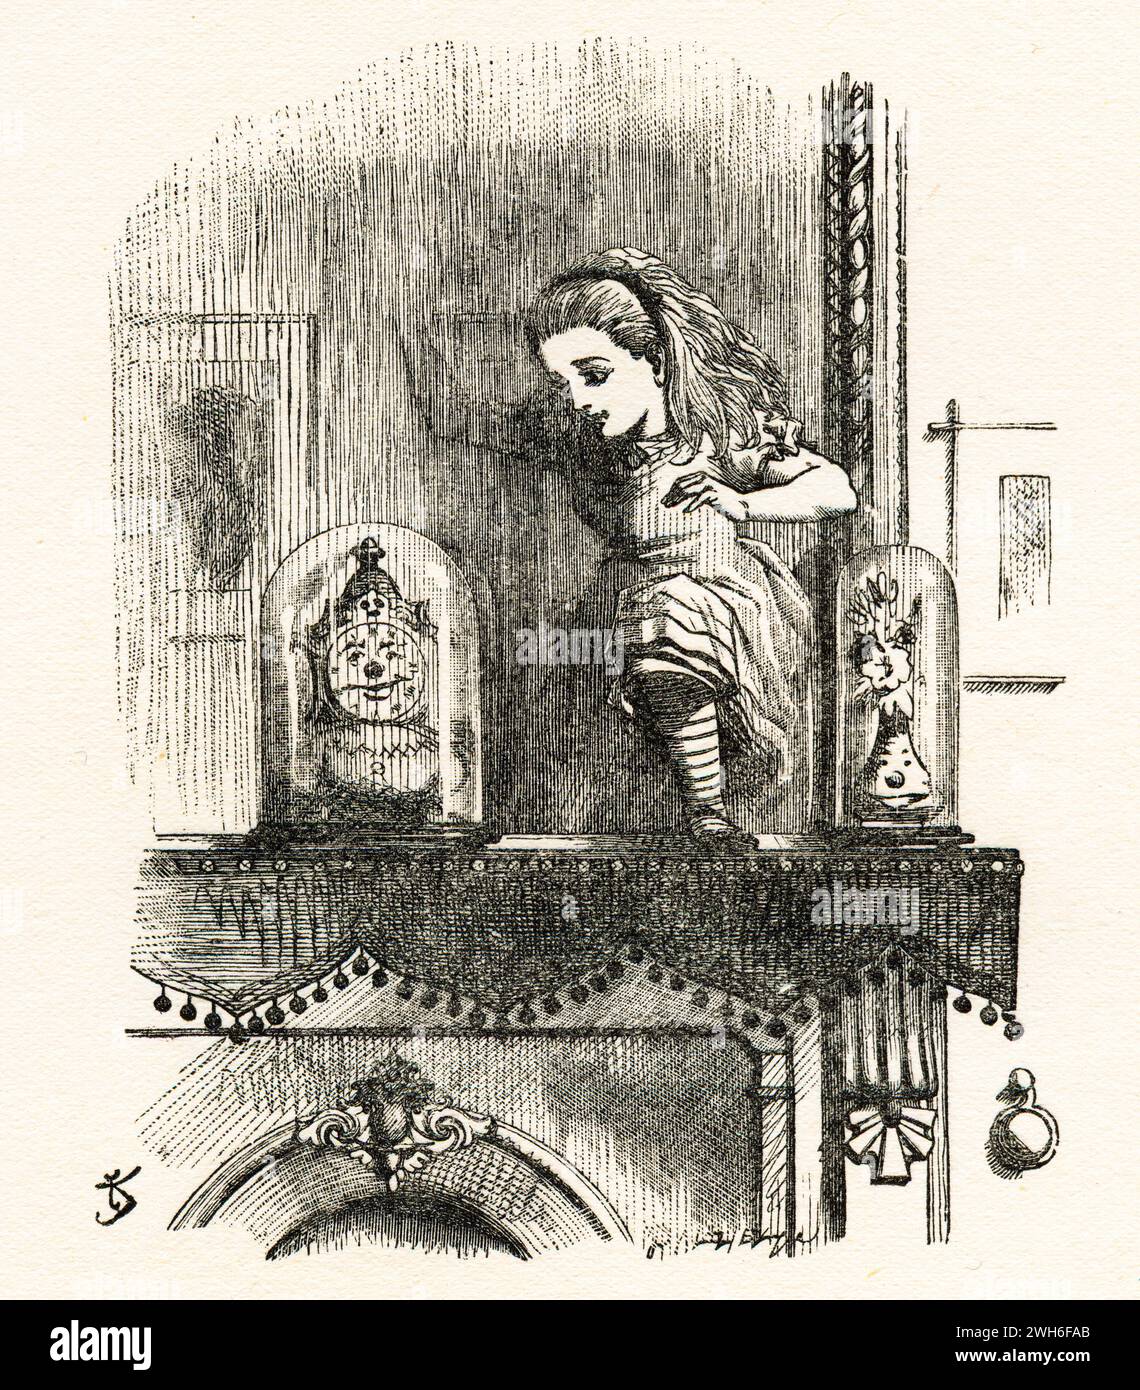 Through The Looking-Glass, by Lewis Carroll, illustrations by John Tenniel, 1927 Stock Photo